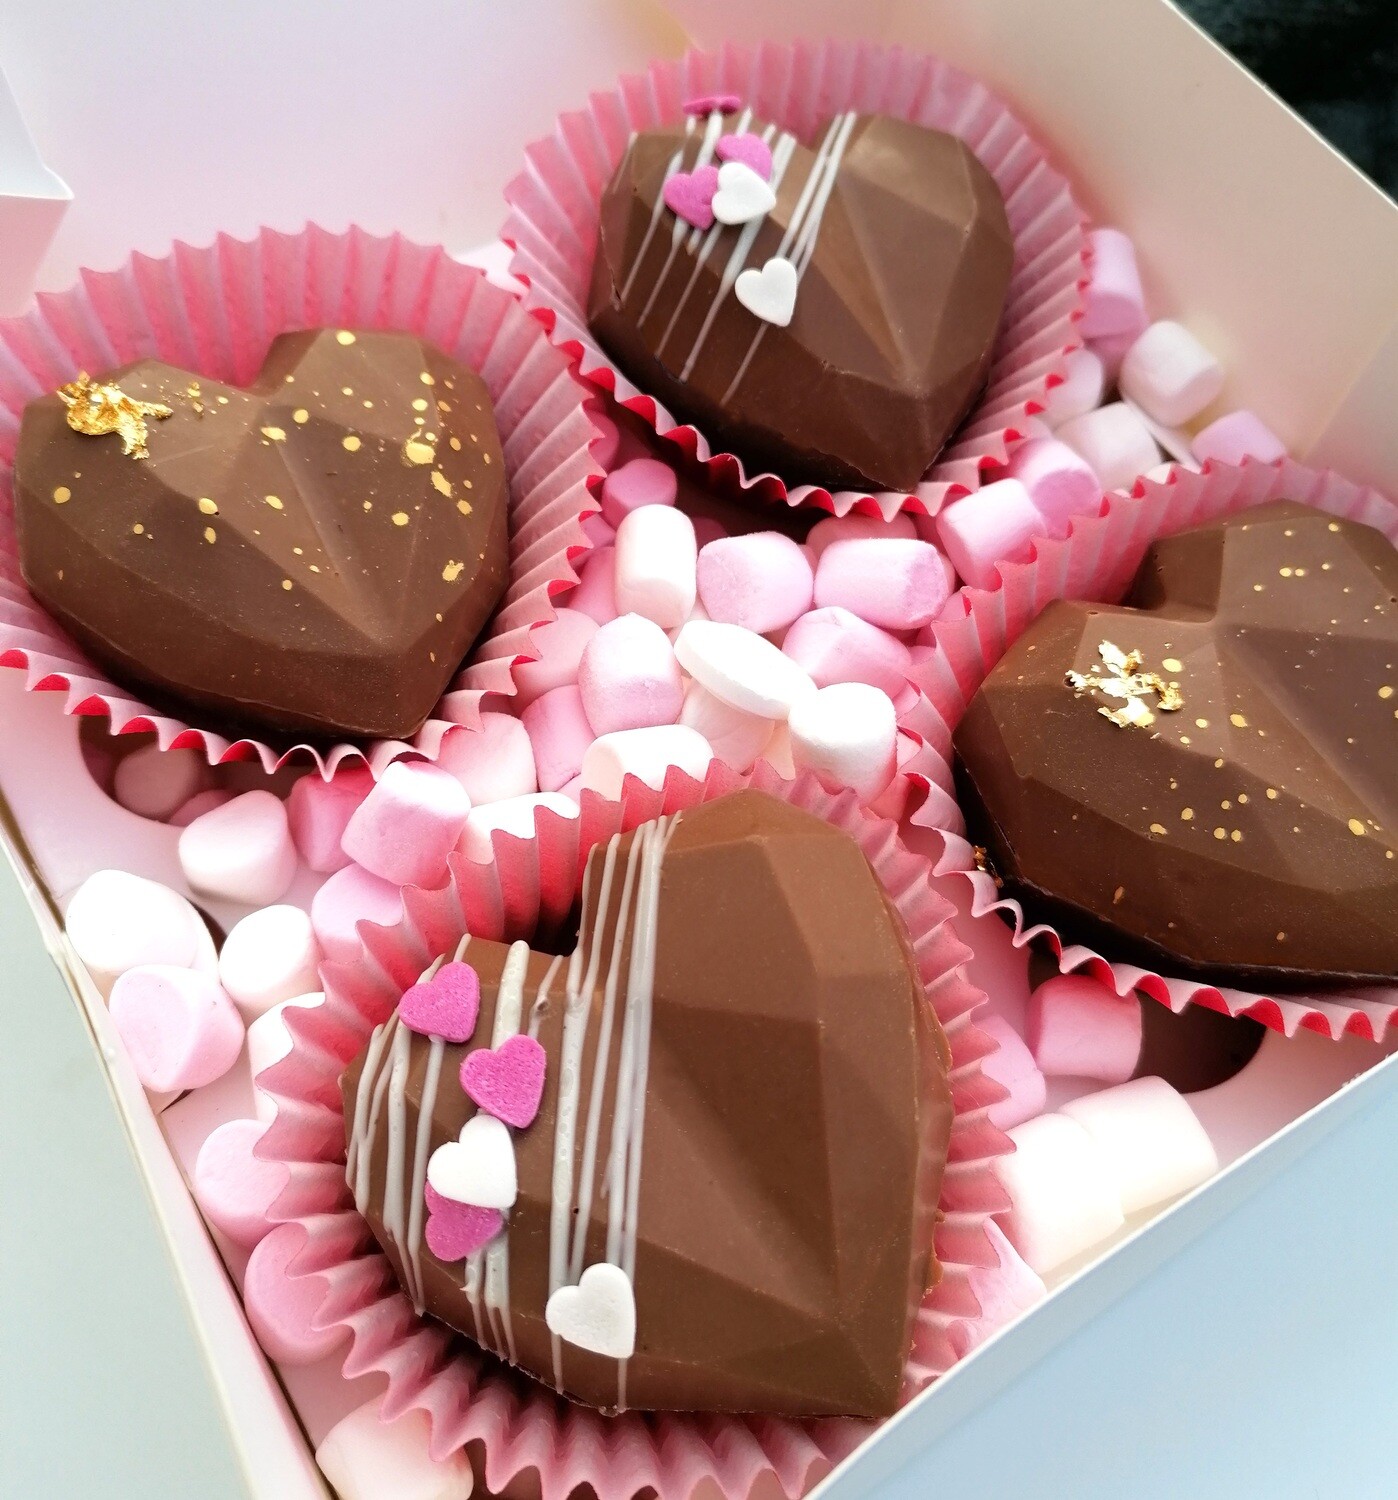 Hand Made Chocolate Hearts With Filling